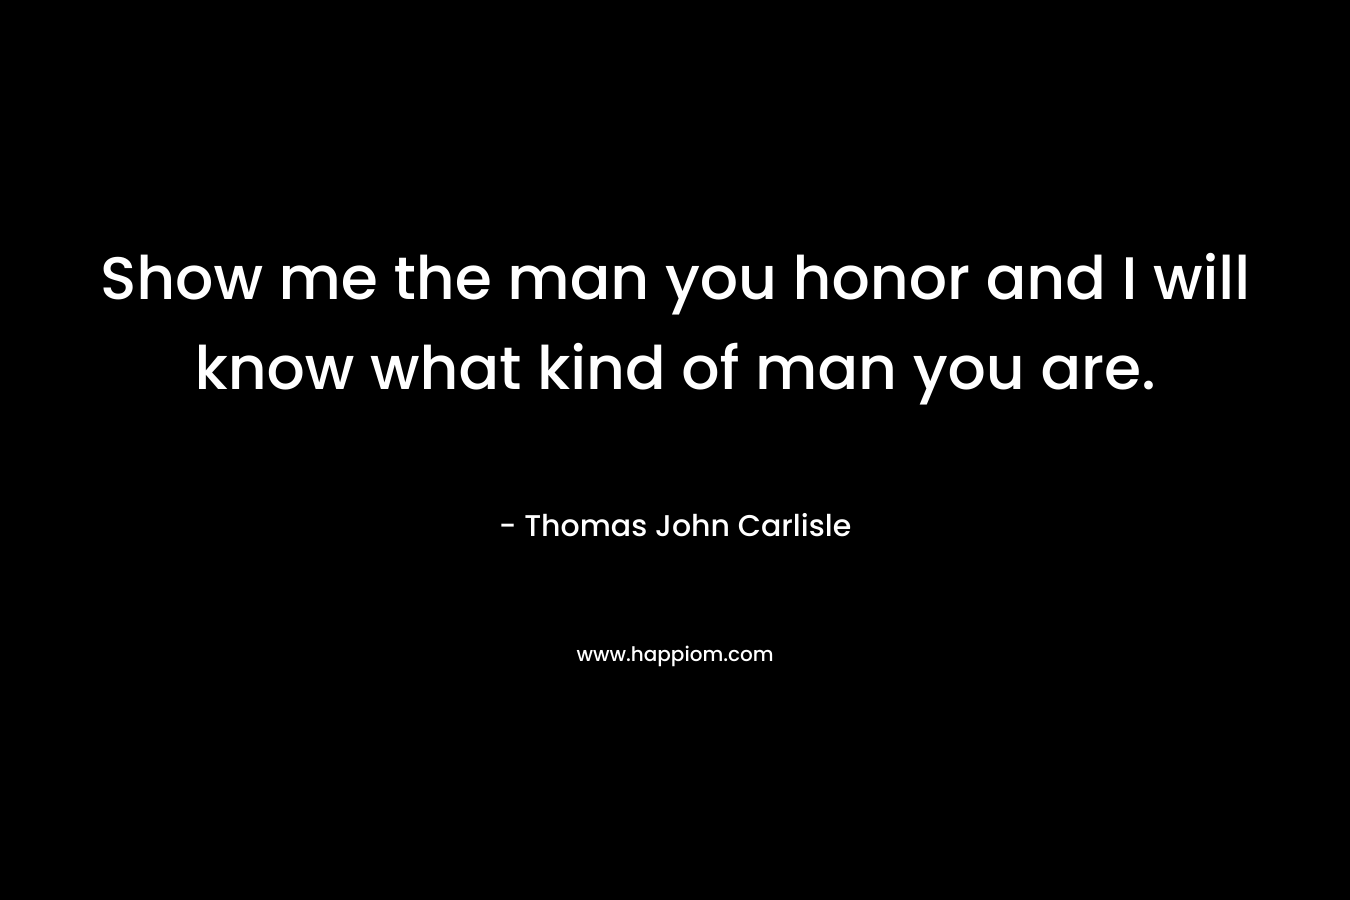 Show me the man you honor and I will know what kind of man you are. – Thomas John Carlisle